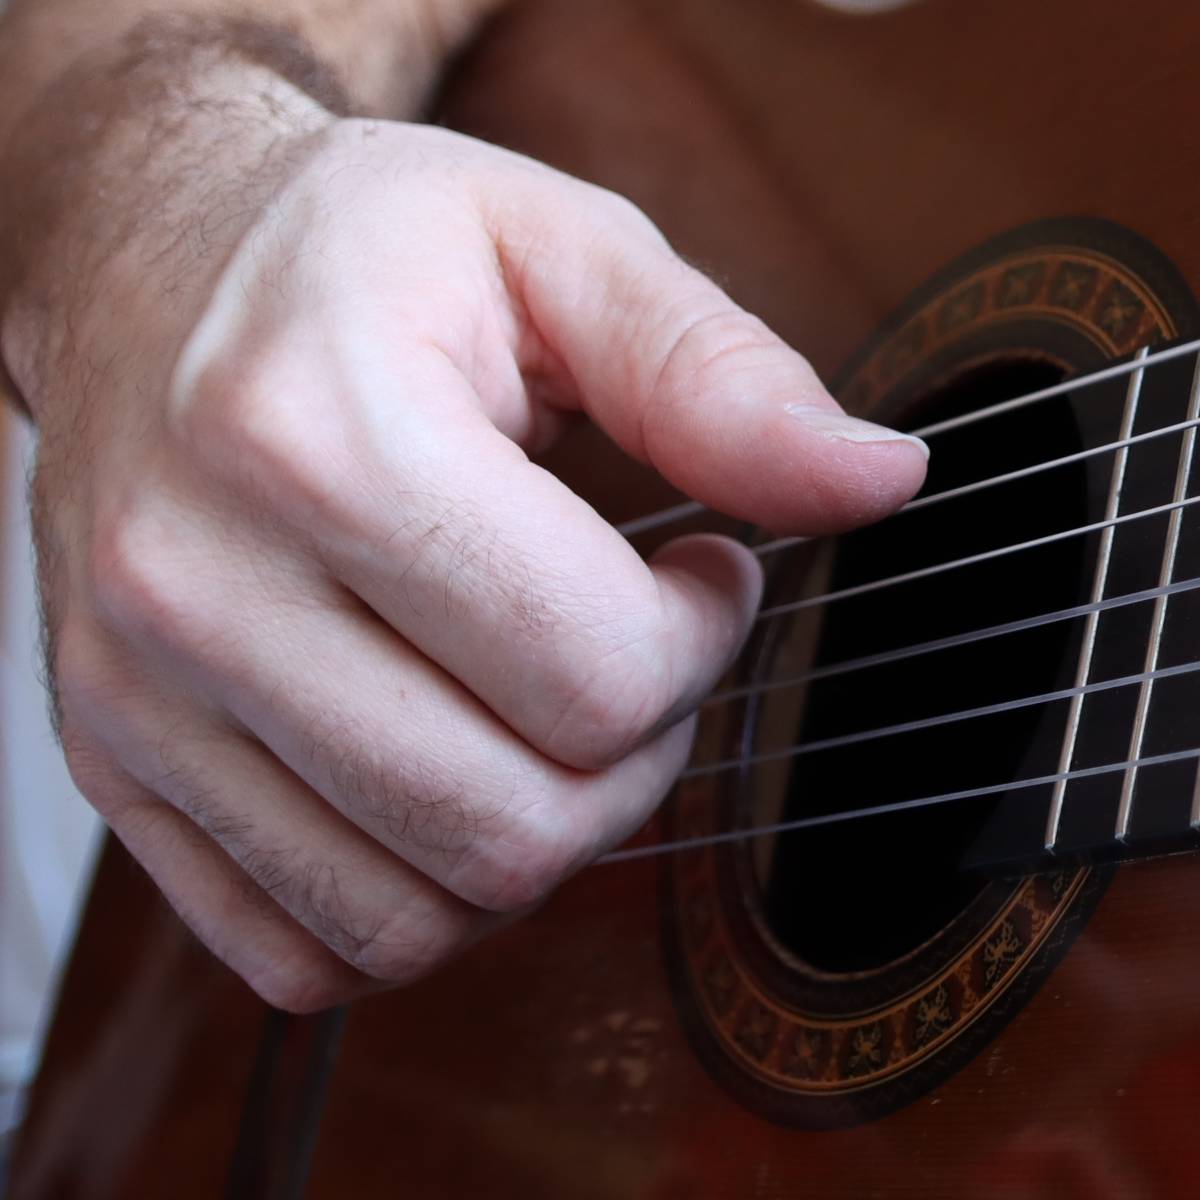 A right hand showing proper finger picking guitar technique on classical guitar for playing fingerstyle